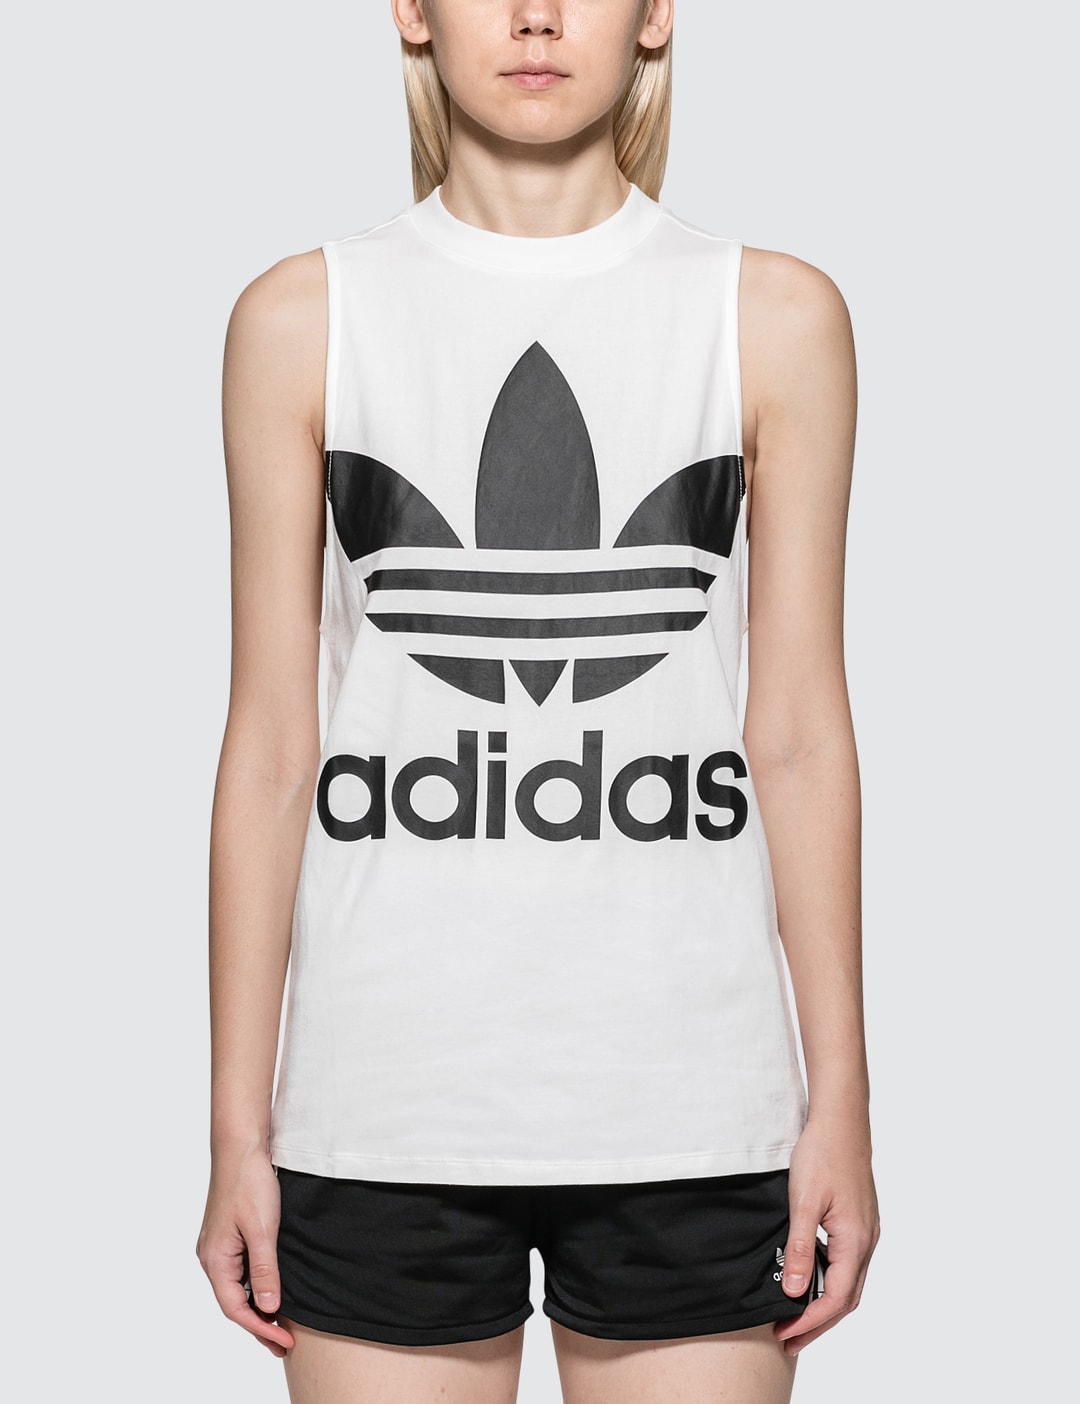 Adidas Originals - Trefoil Tank | HBX - Globally Curated Fashion and ...